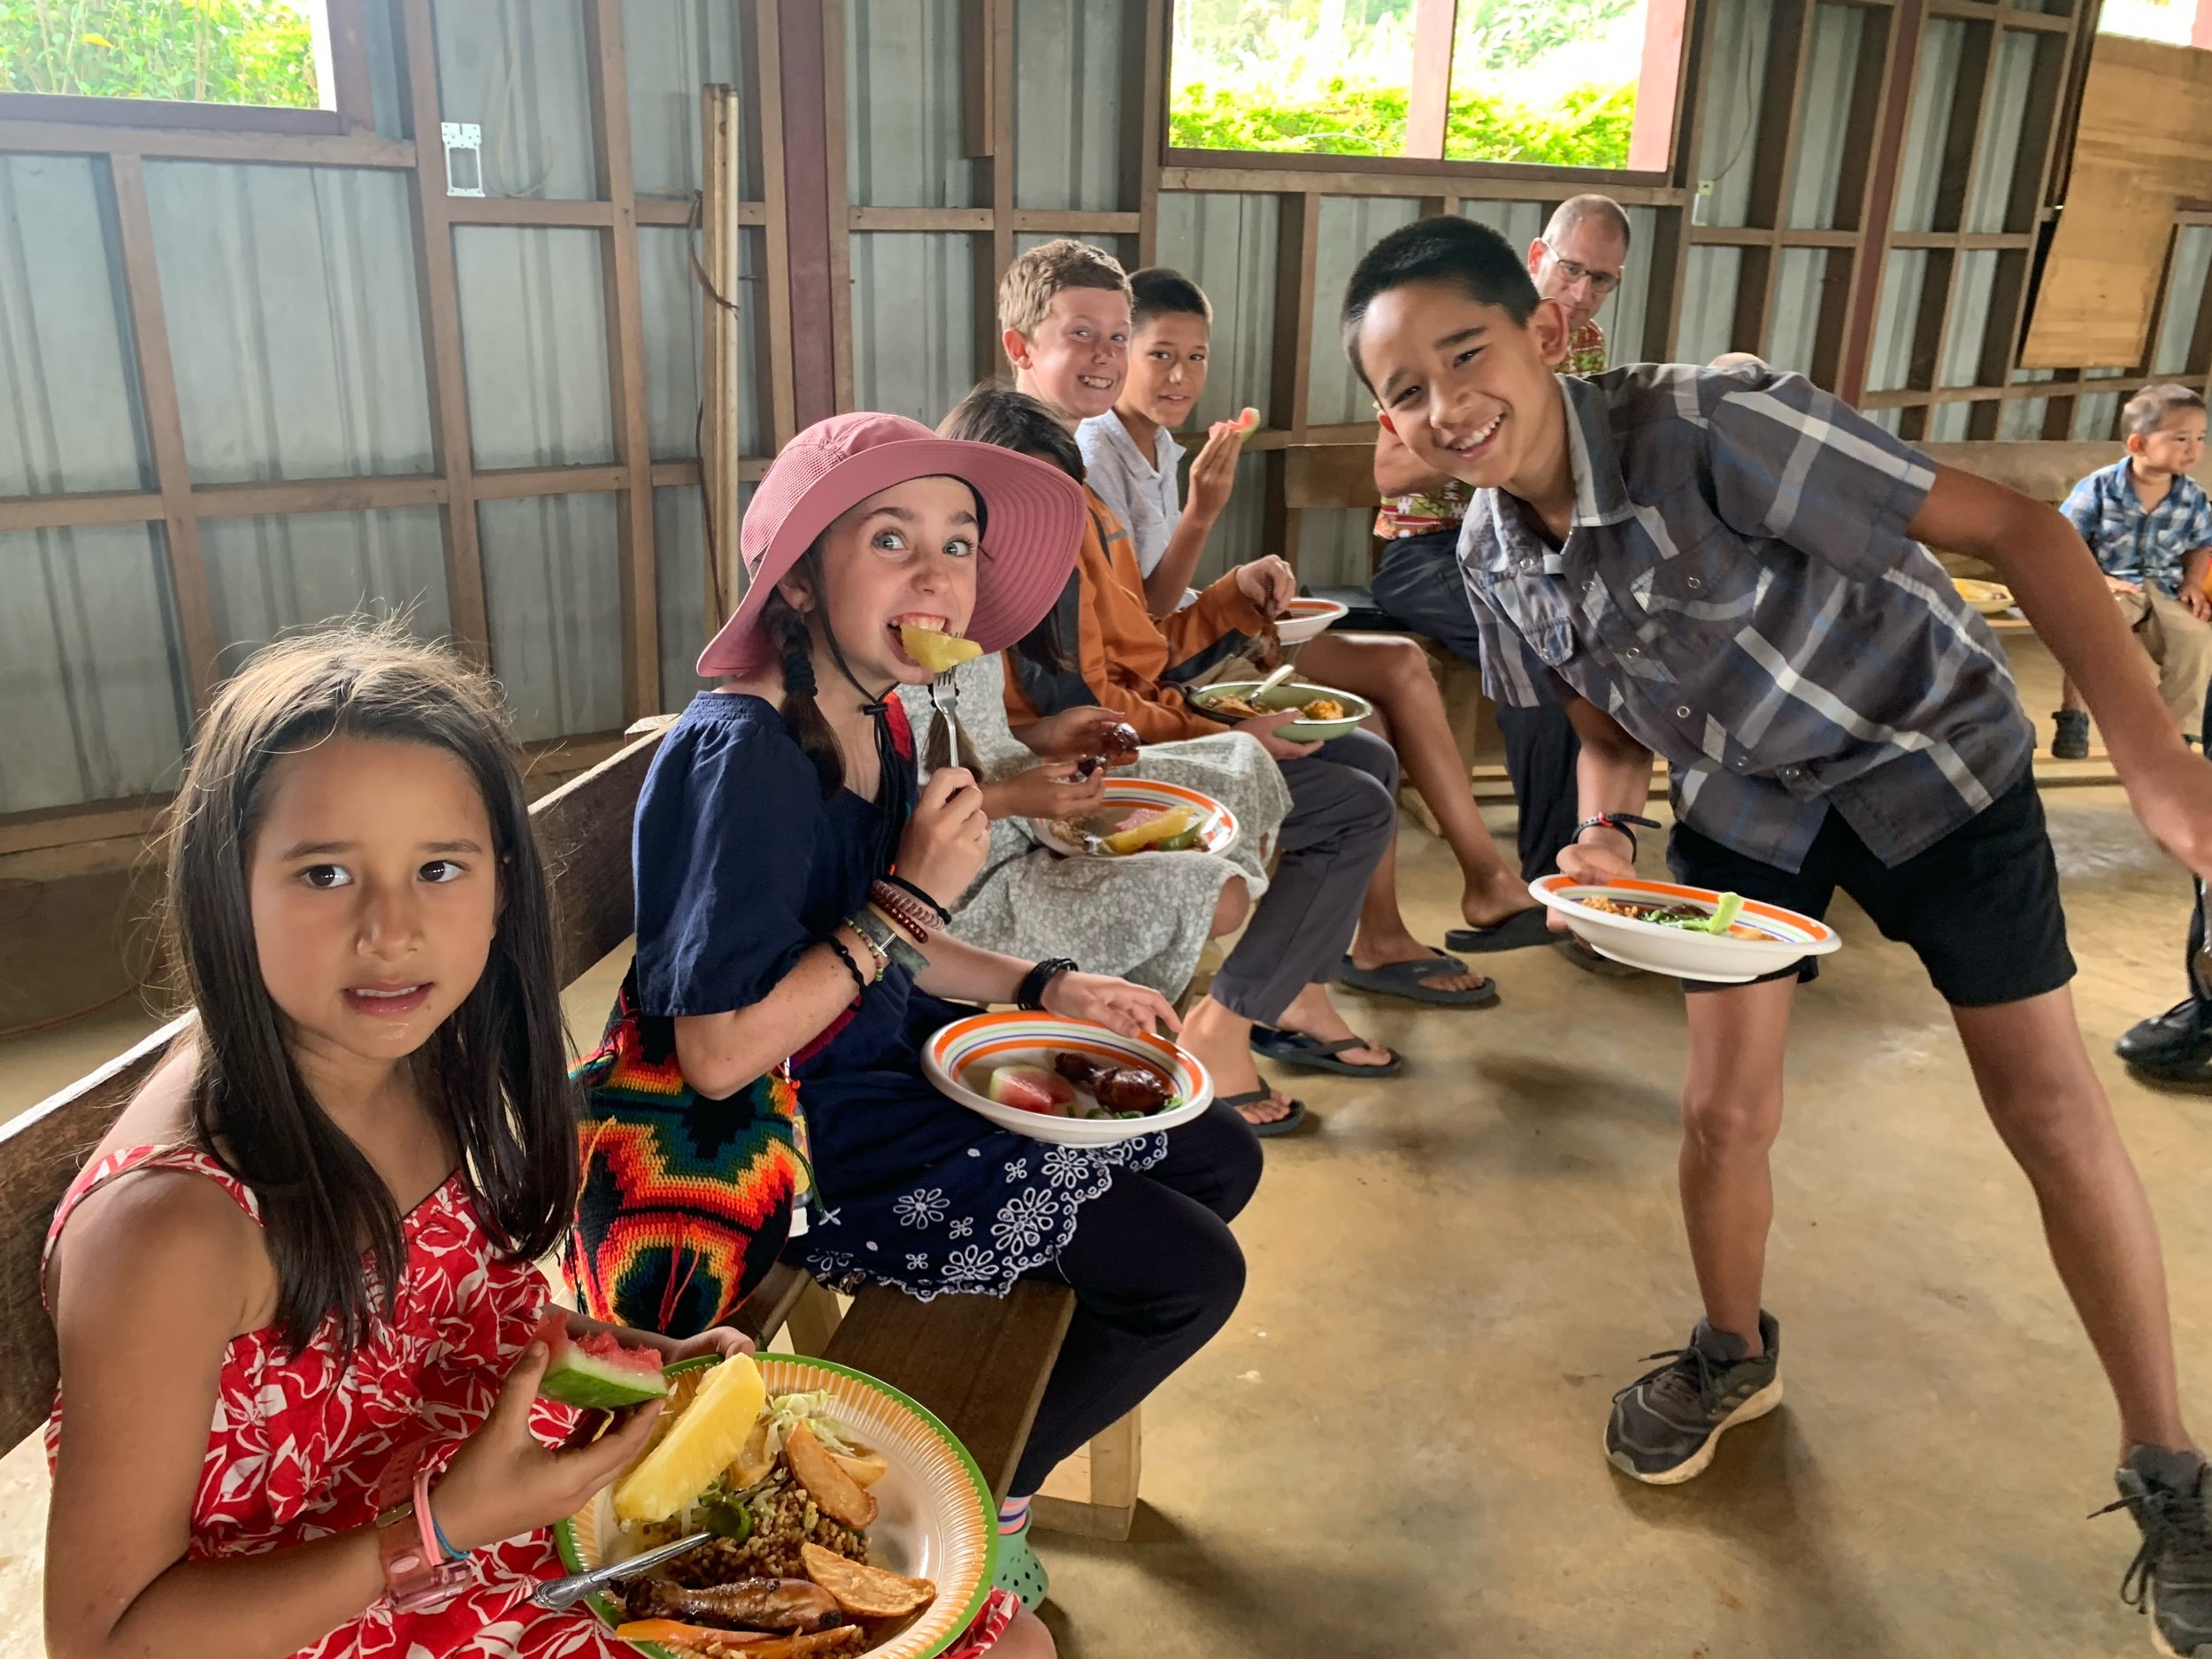  The community was super kind to feed us while we were there. We are sitting inside the PNG Bible Church building. Miraculously, it was one of the few buildings that wasn’t burned down. The Lord preserved it! 